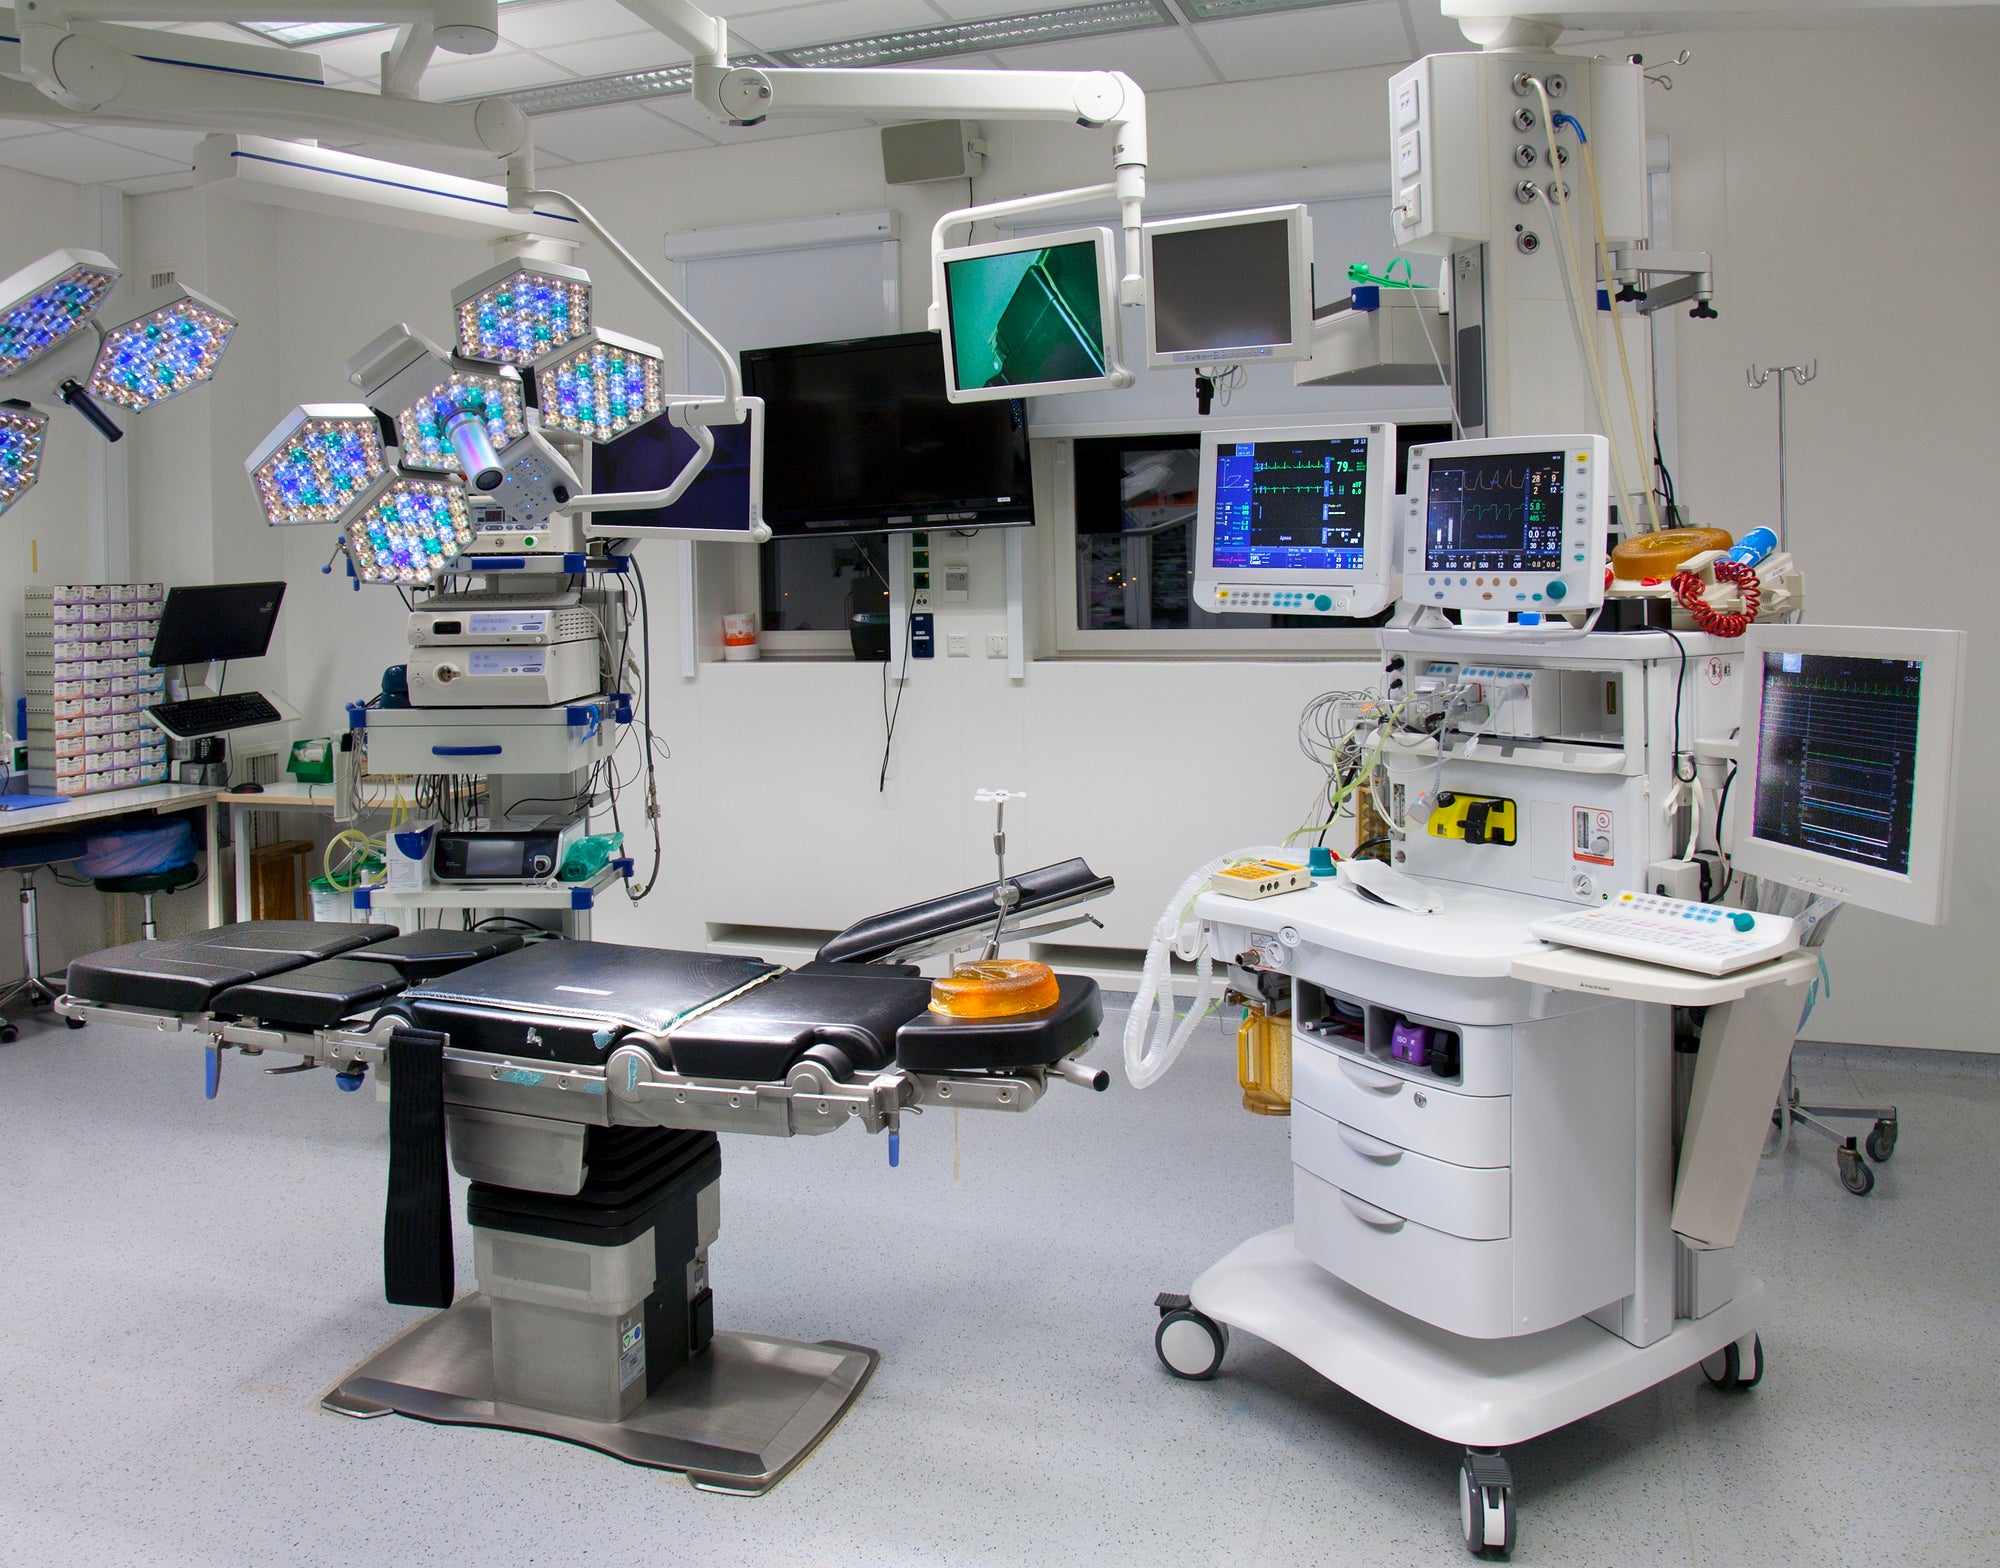 Upgrade Your Medical Practice with ProNorth Medical's Operating Room Equipment